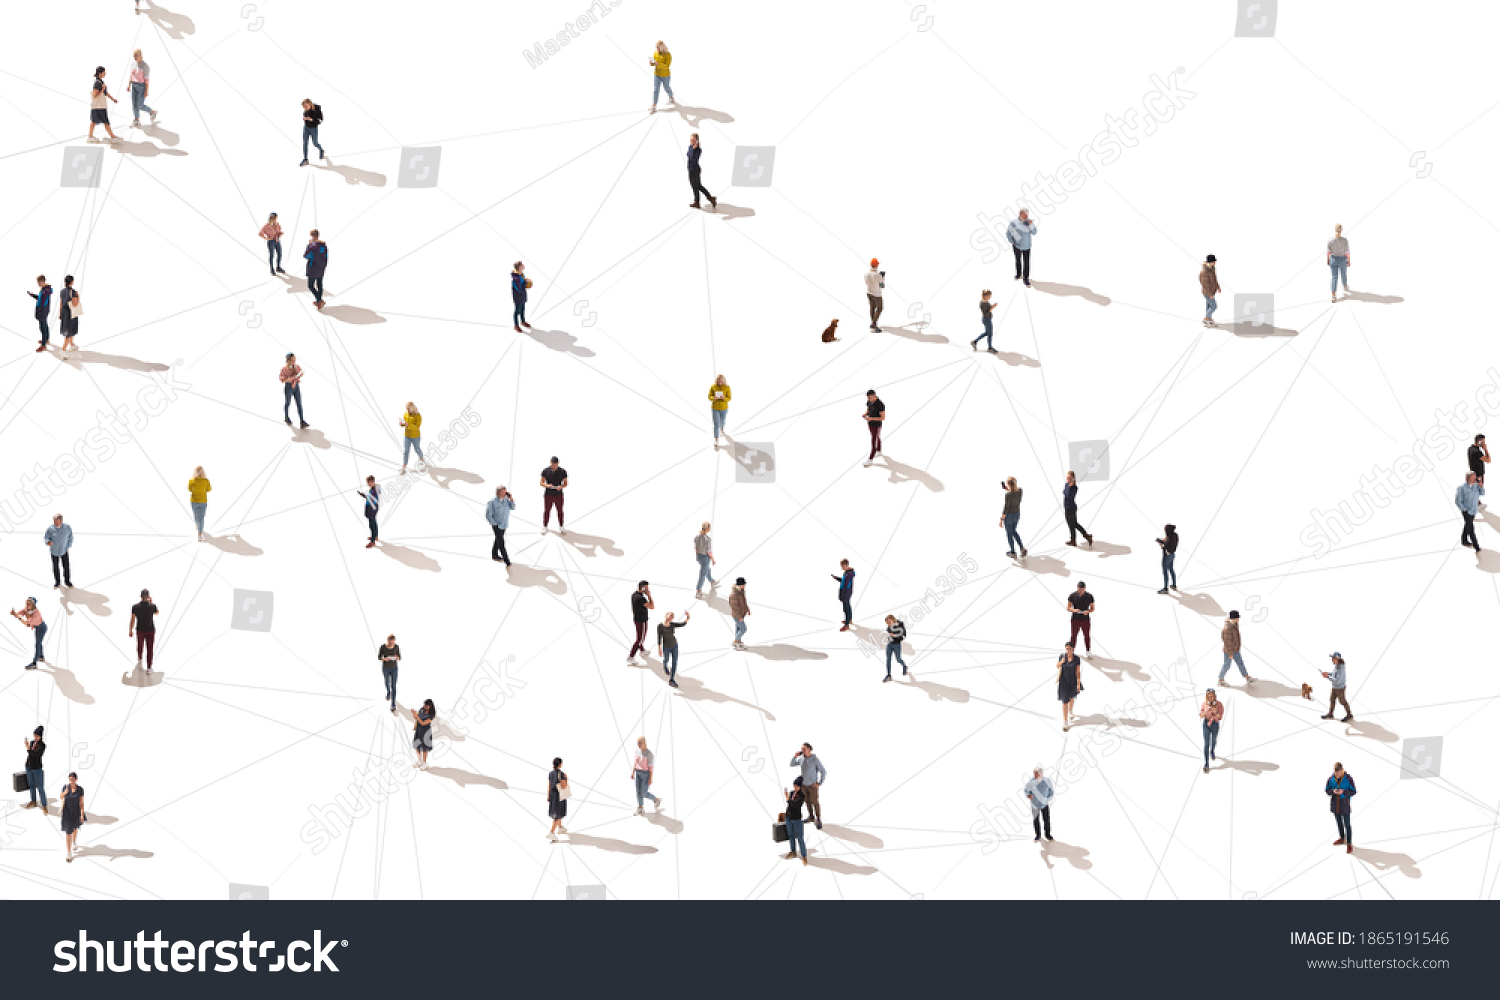 Aerial view of crowd people connected by lines, social media and communication concept. Top view of men and women isolated on white background with shadows. Staying online, internet, technologies. #1865191546